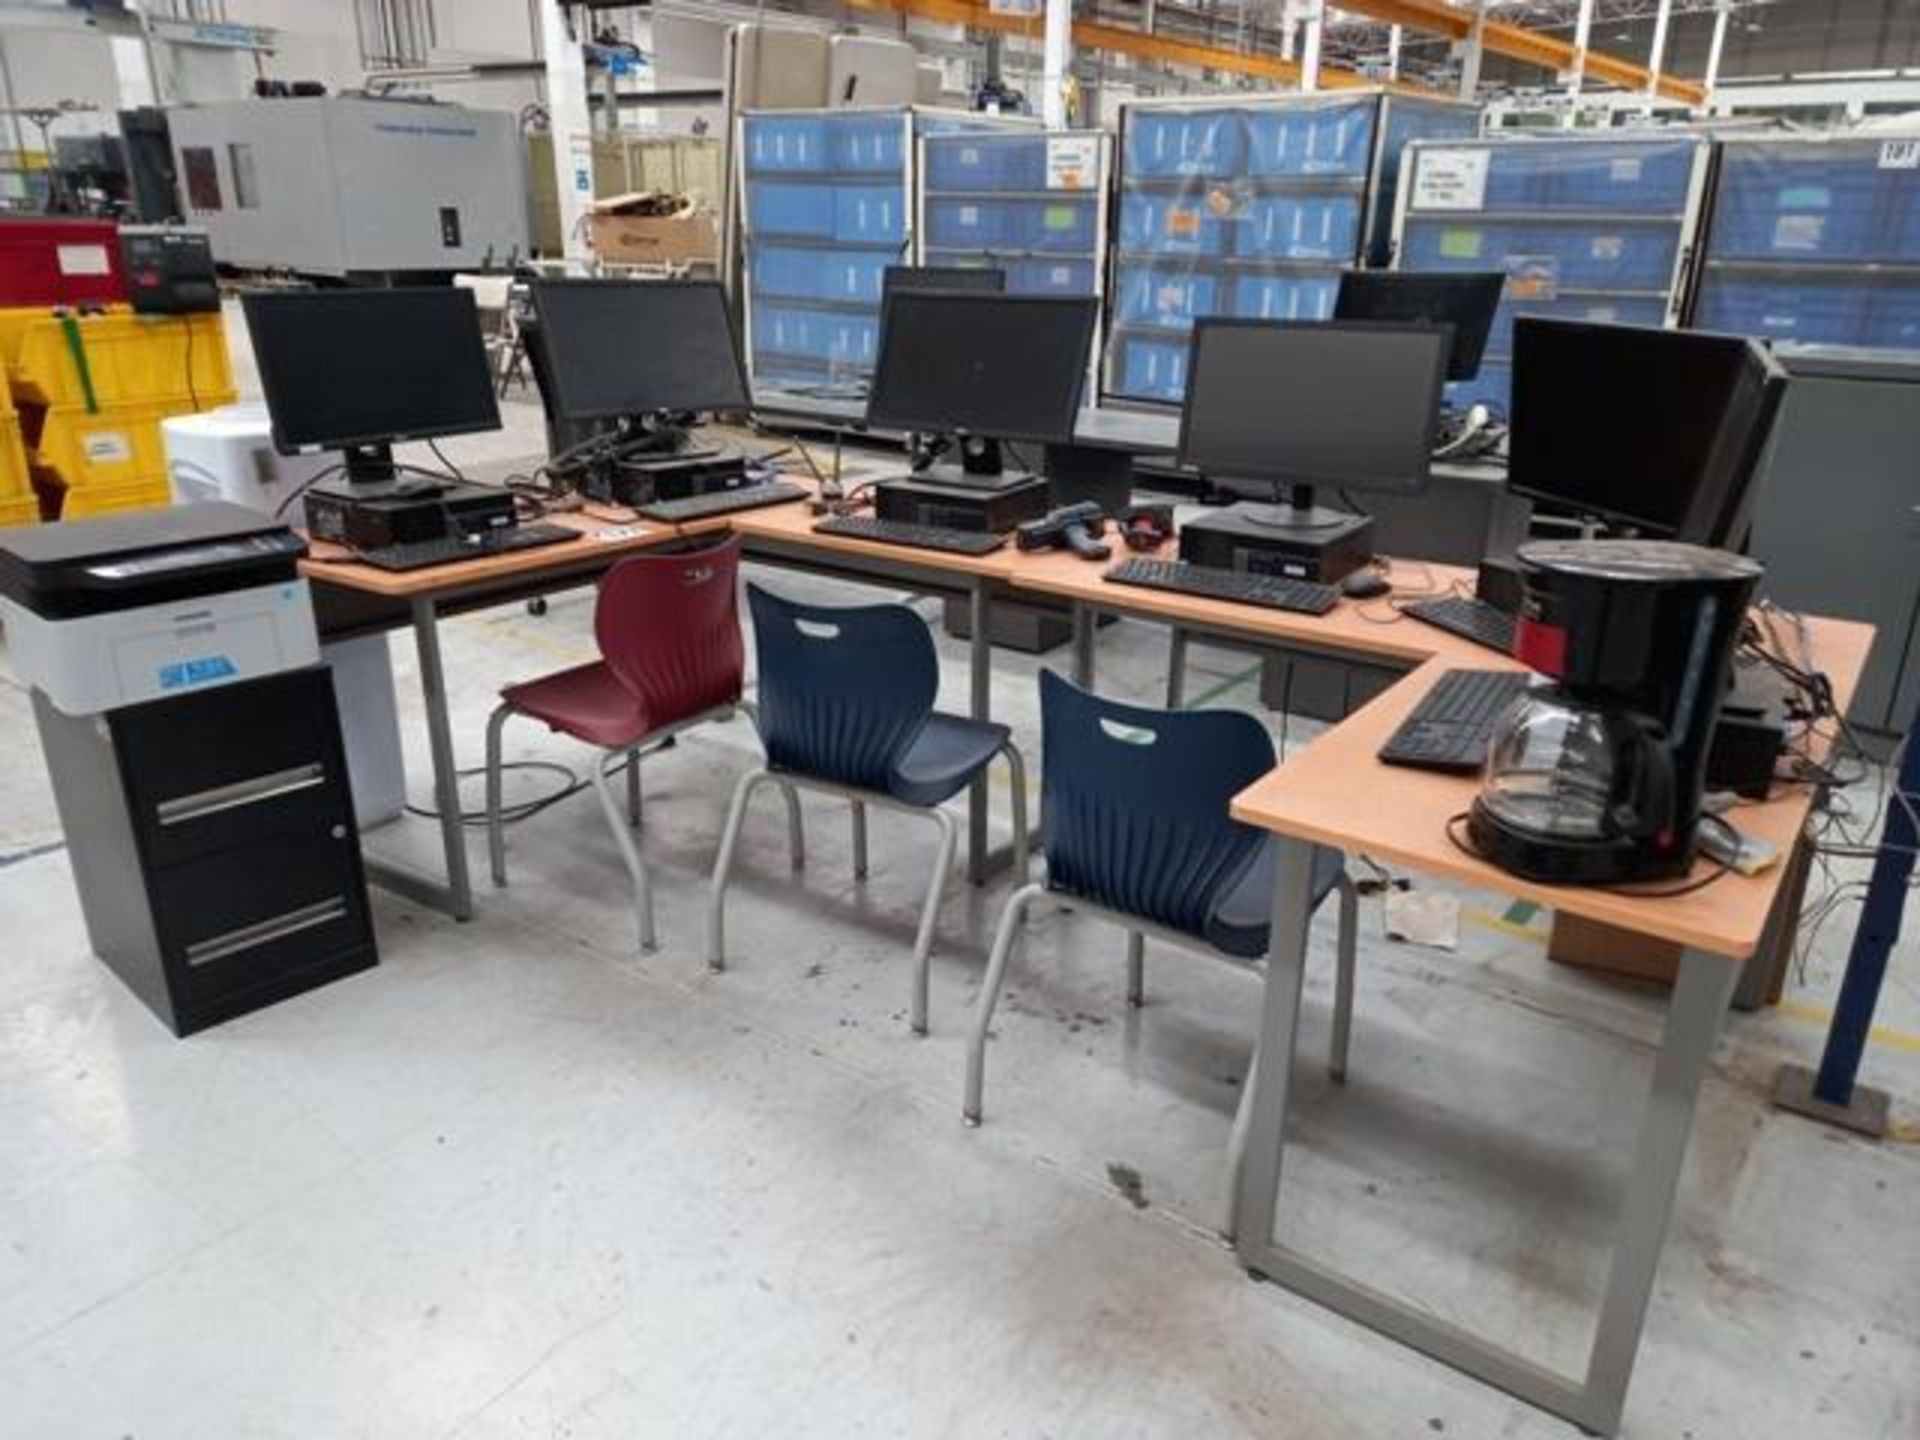 LOT: (66) Of Furniture and Computing Equipment Consisting of: Computers, Printers, Desks, Chairs, Dr - Image 24 of 38